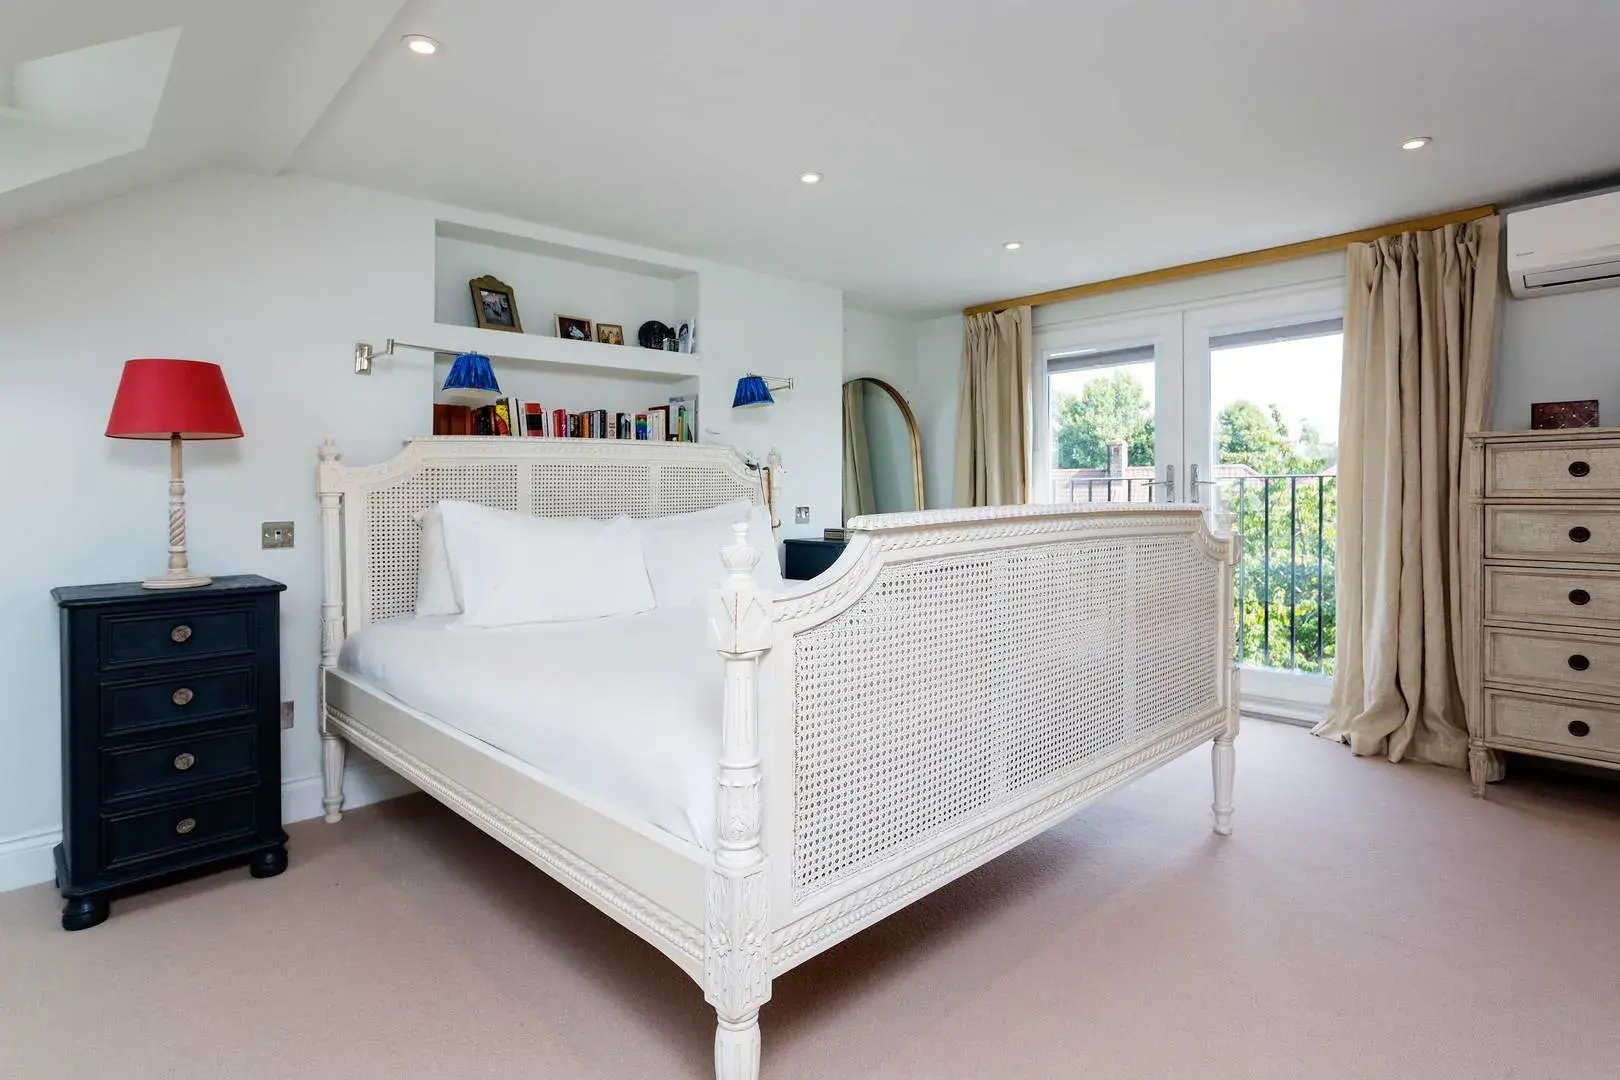 Nowell Road, holiday home in Barnes, London